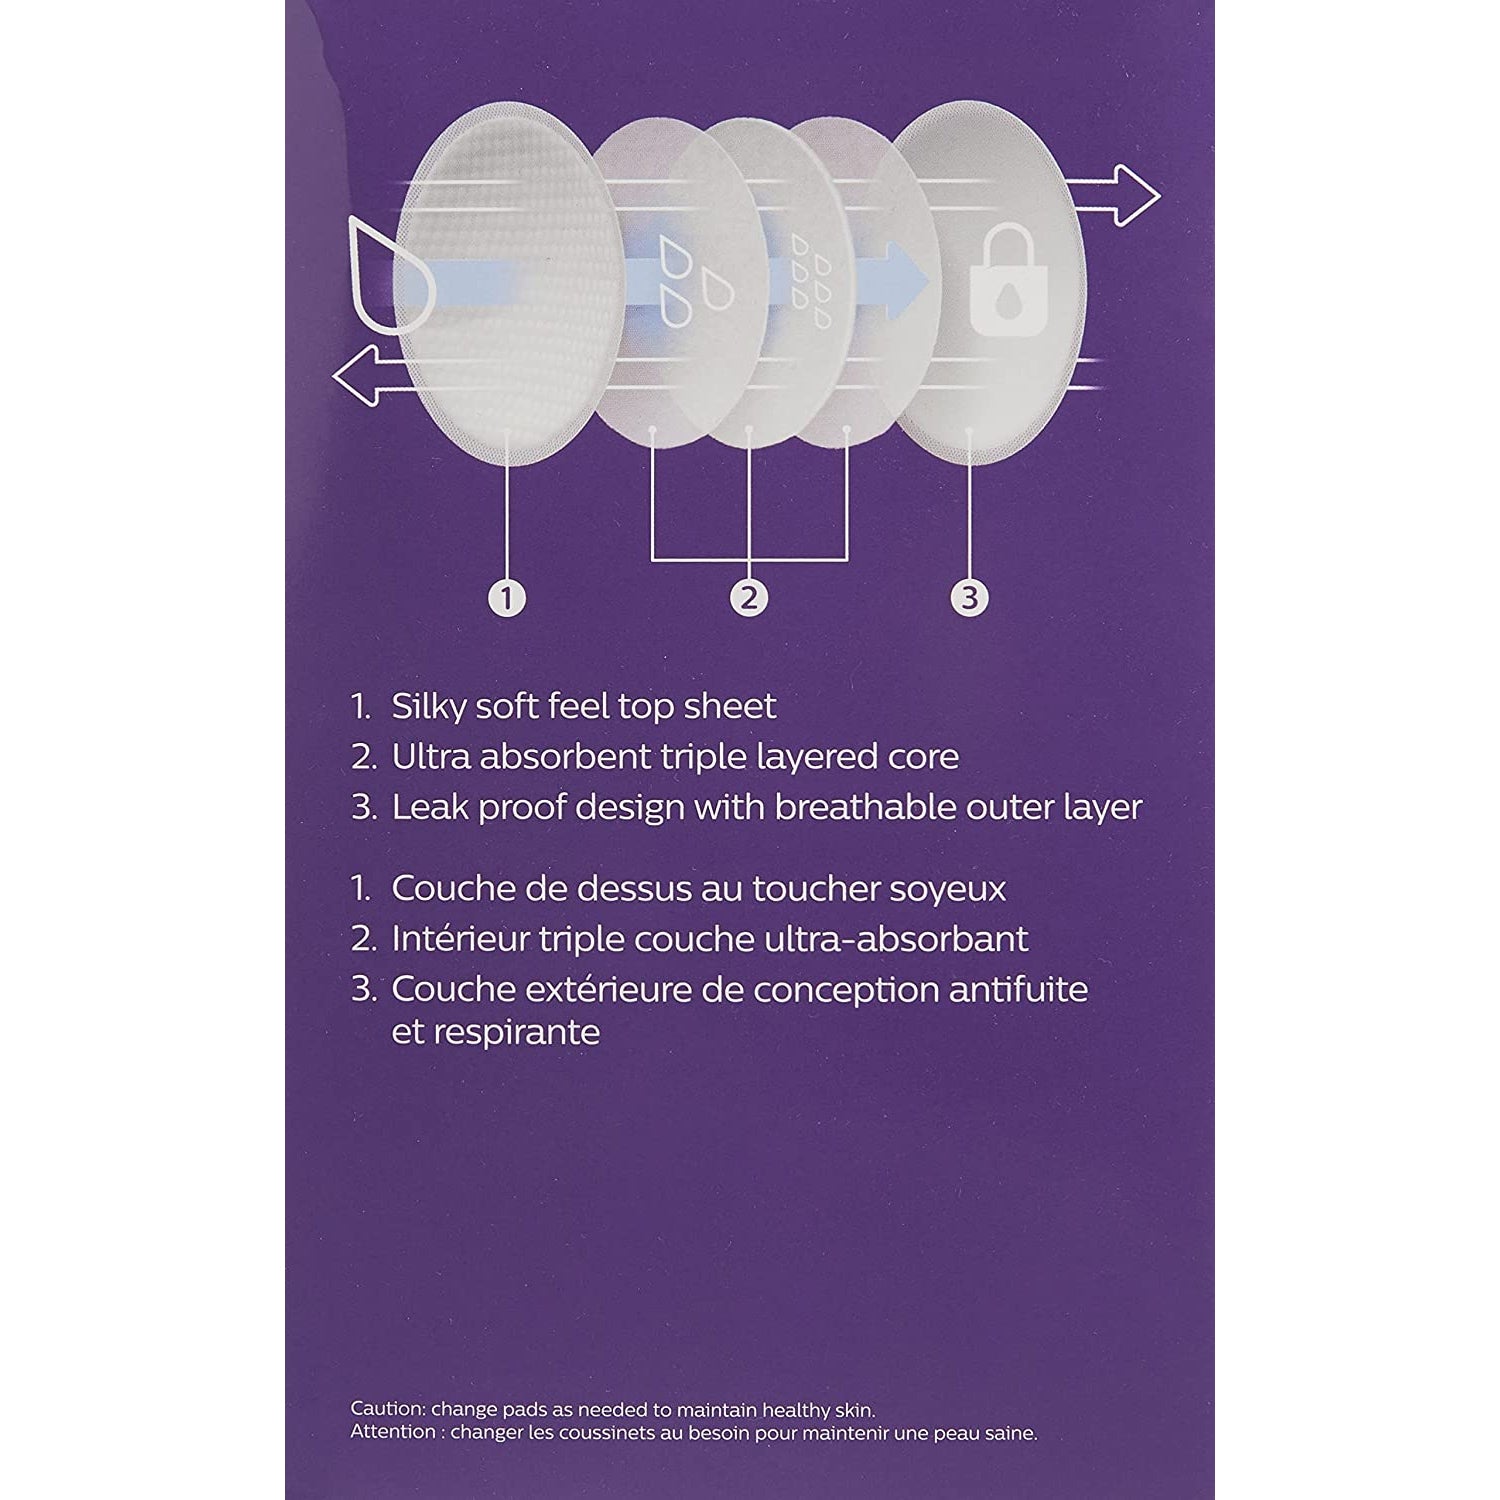 Philips Avent Disposable Breast Pads x60